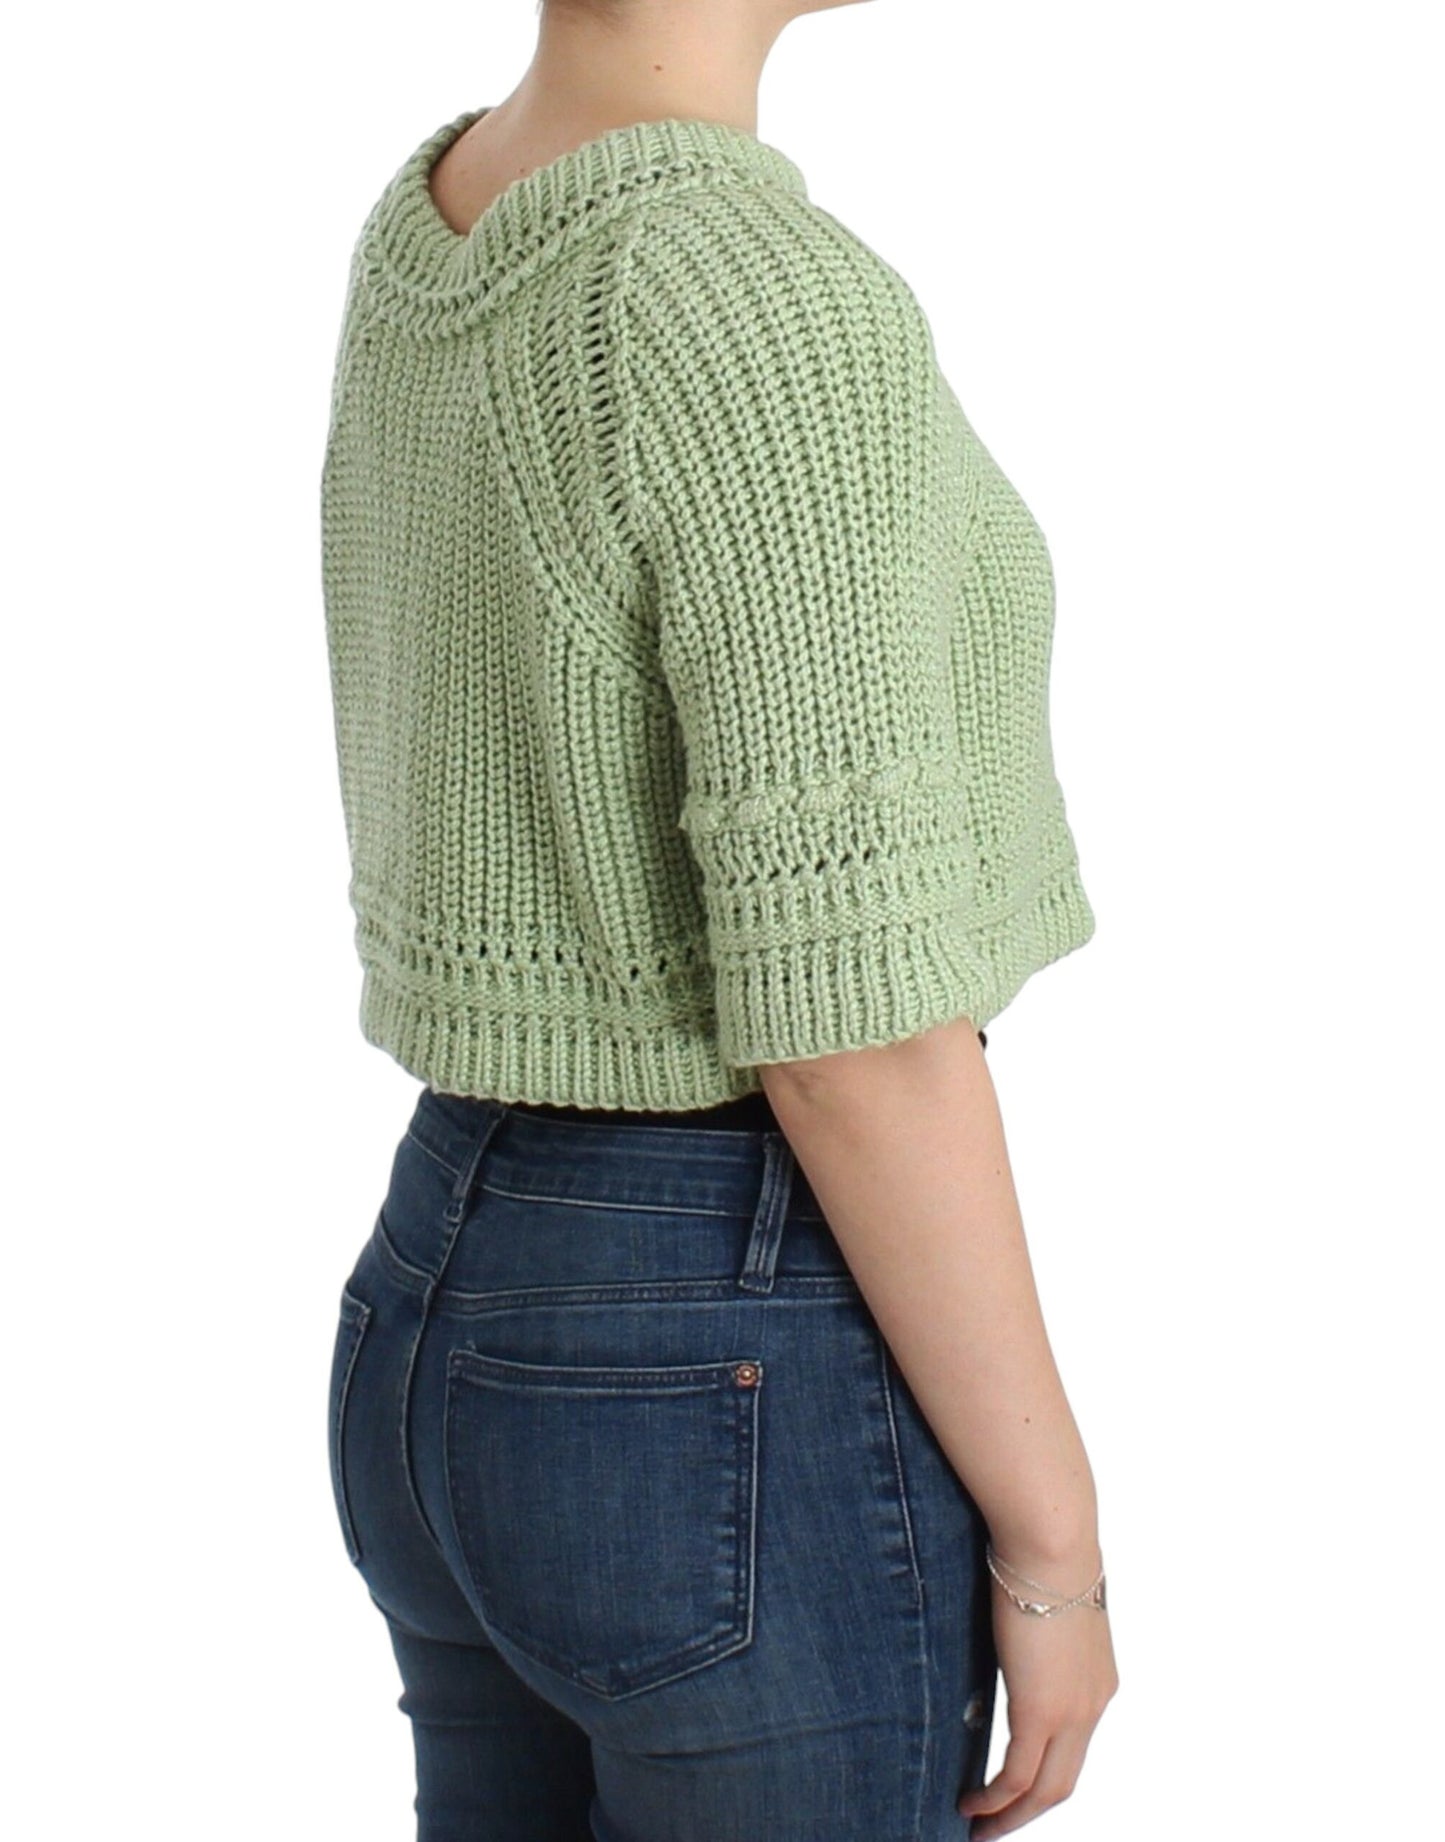 Green Cropped Knit Sweater Knitted Jumper